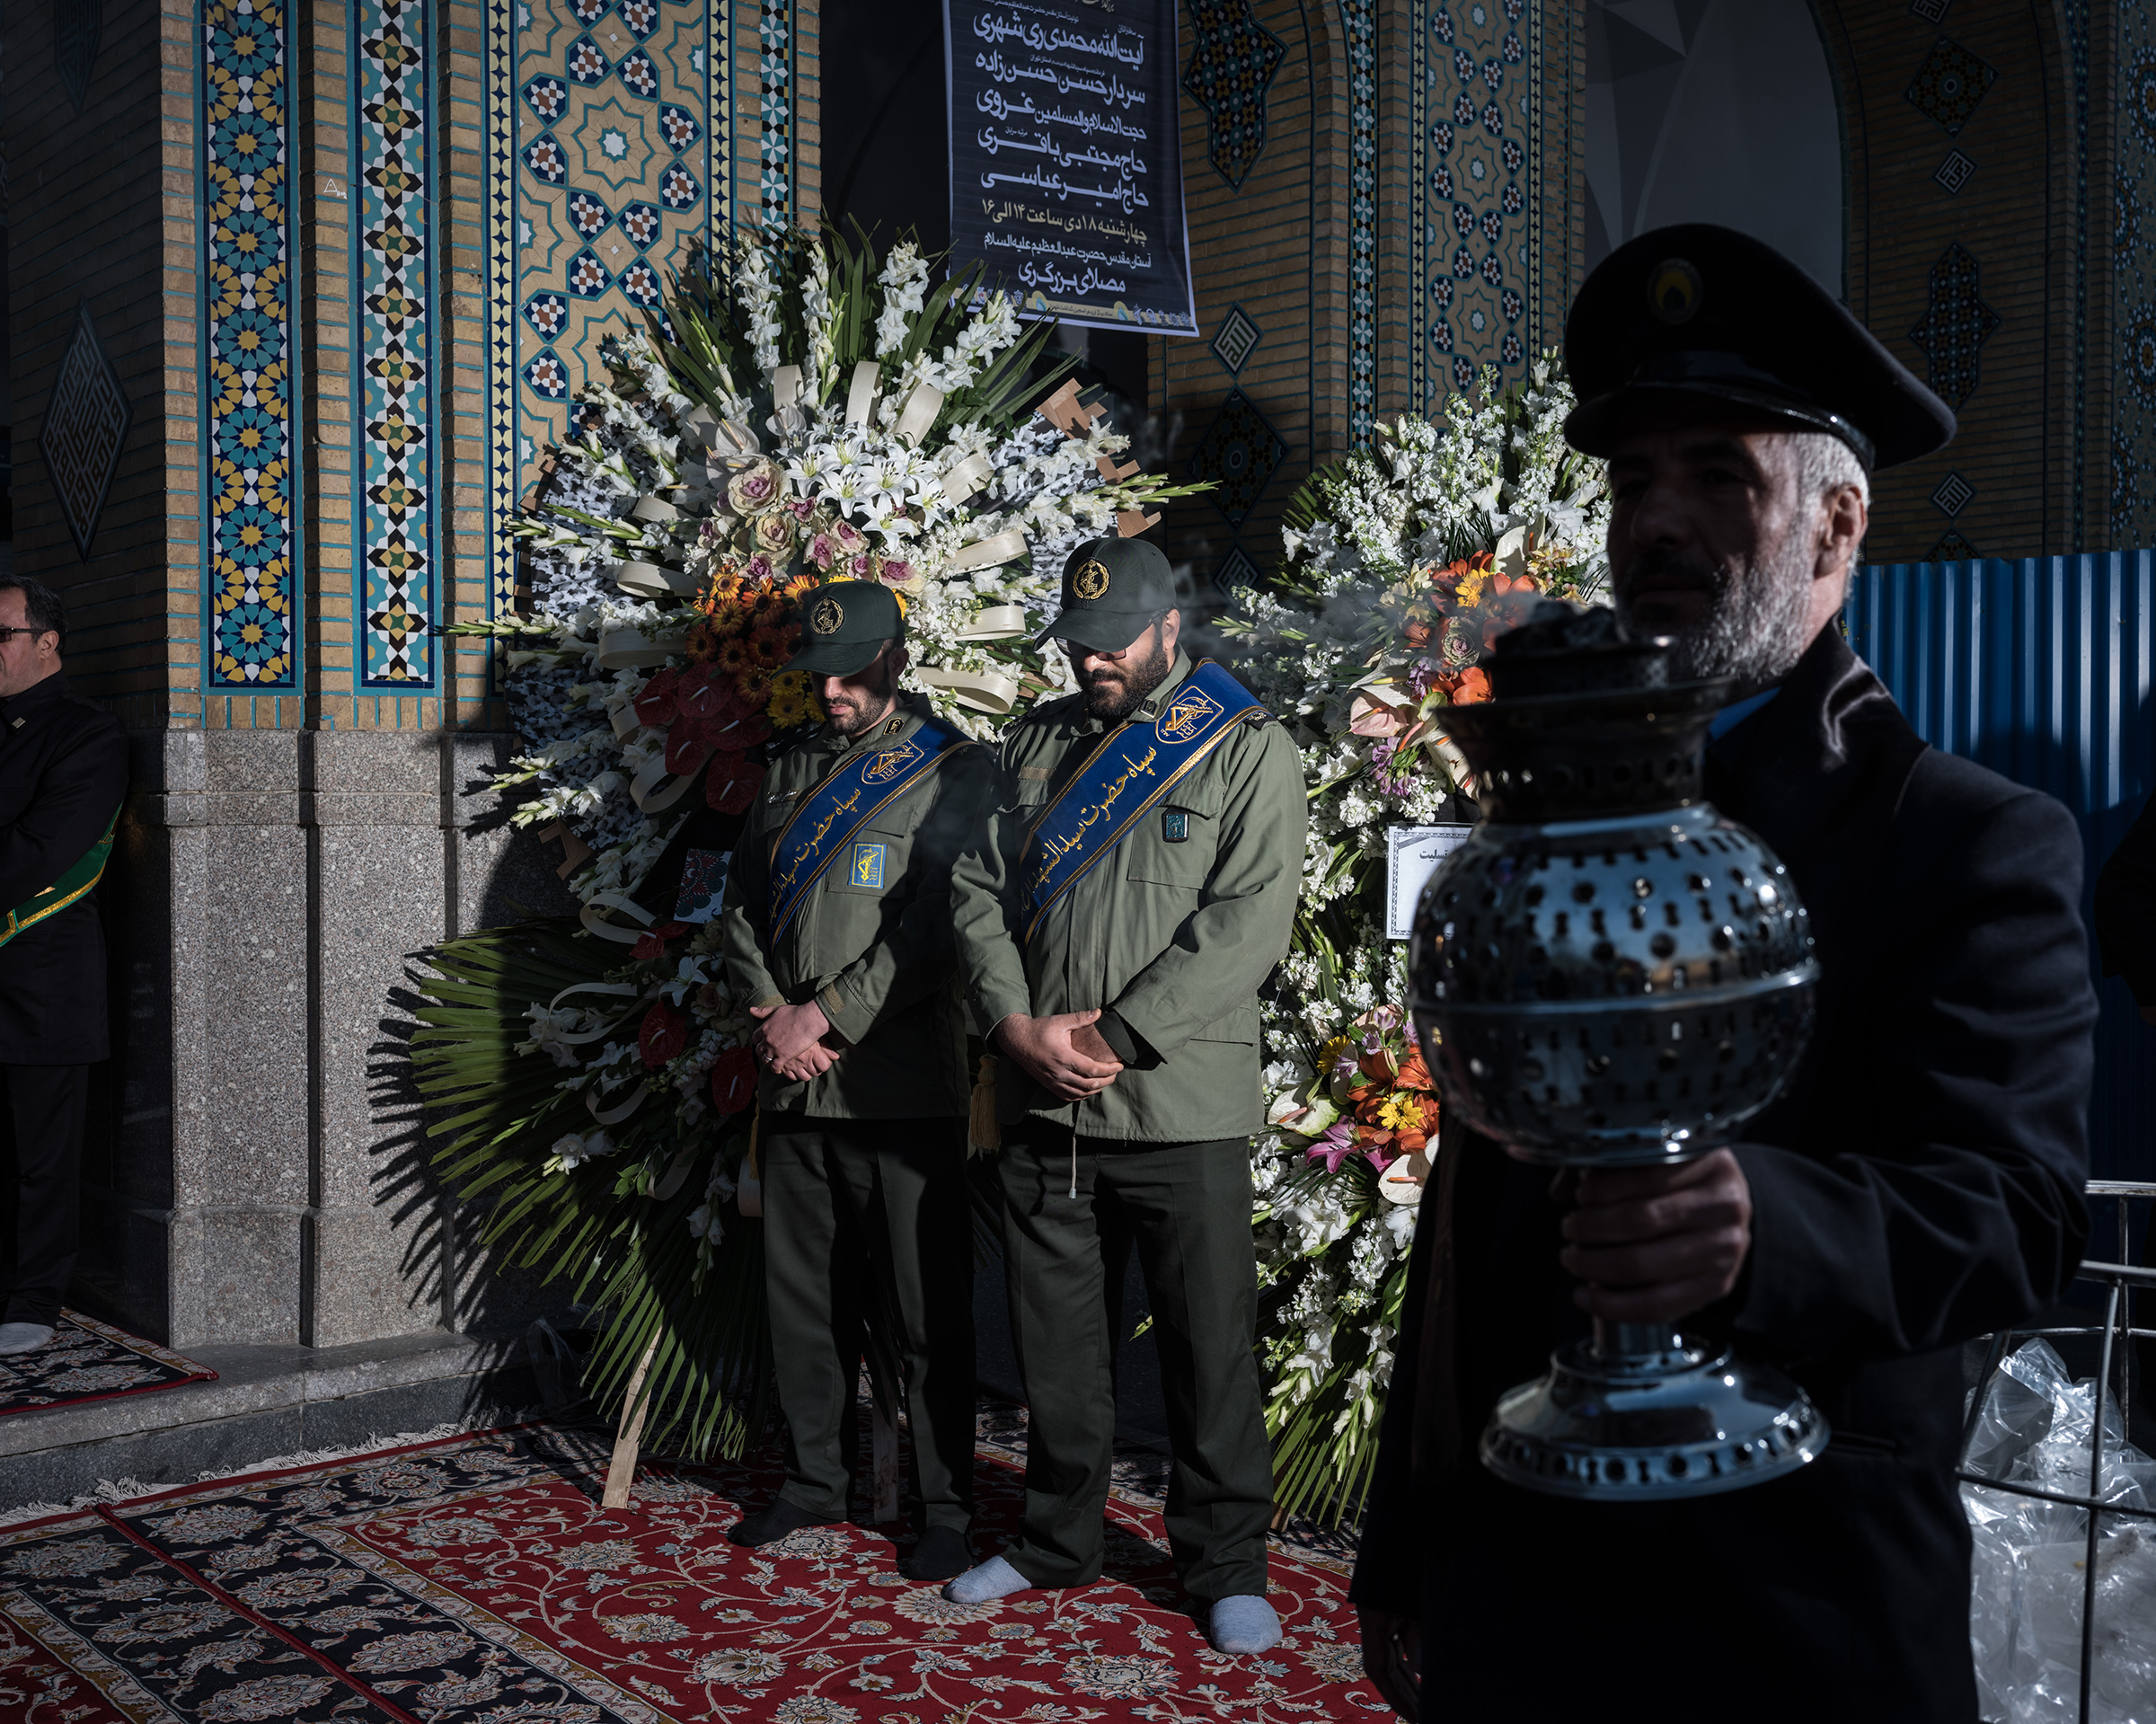 At the shrine to Shah Abdol Azim in Tehran, a special ceremony was held on Jan. 8. (Newsha Tavakolian—Magnum Photos for TIME)